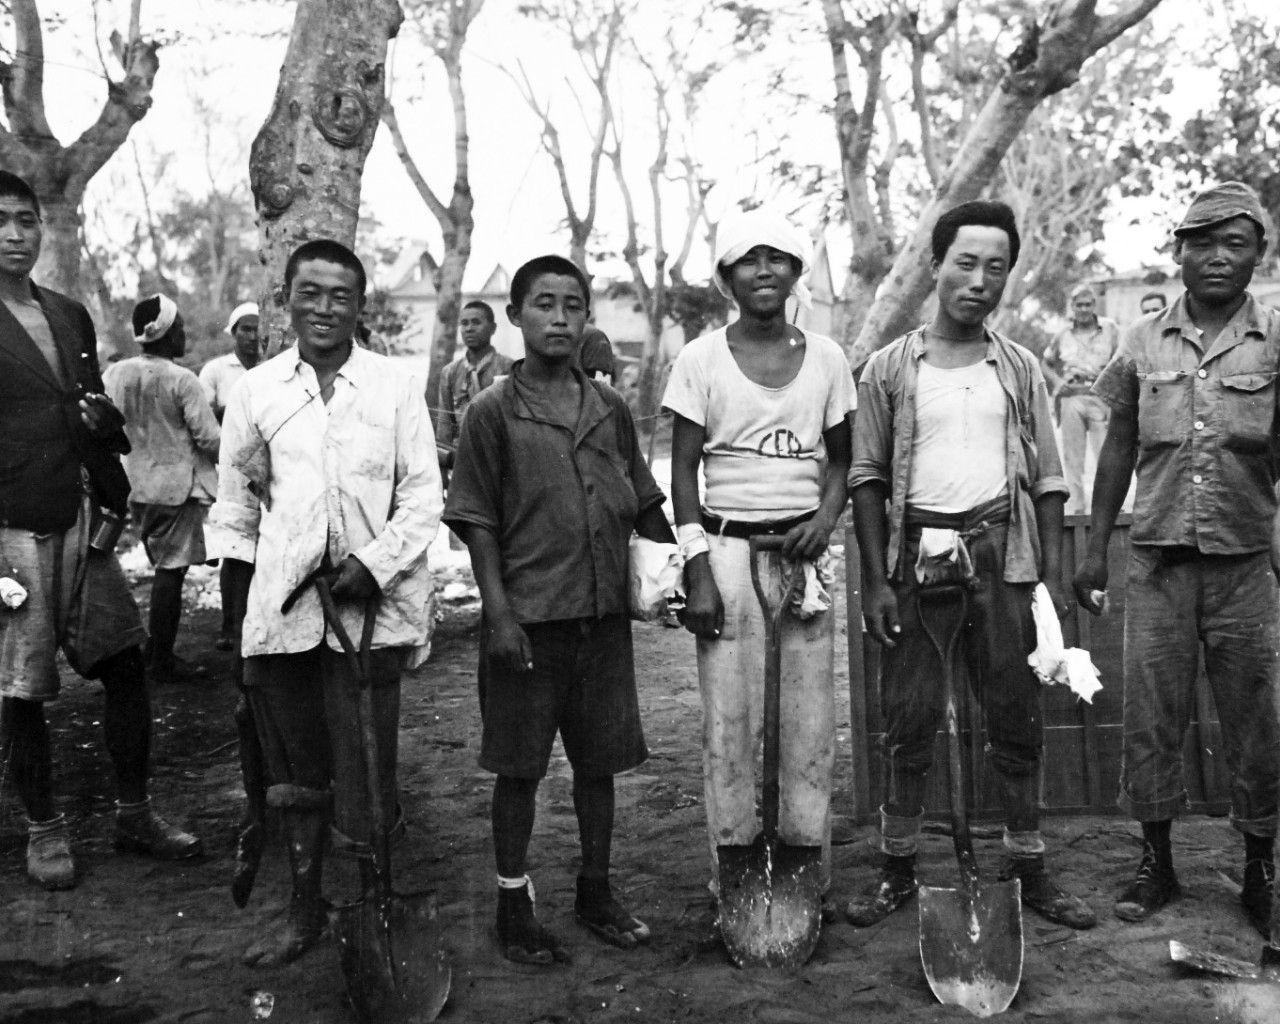 80-G-307792:  Invasion of Saipan, June-July 1944.  Native boys of Saipan help with repairing and building of roads after invasion operations.   Photograph received March 20, 1945.      Official U.S. Navy Photograph, now in the collections of the U.S. Navy.  (2017/04/11).  